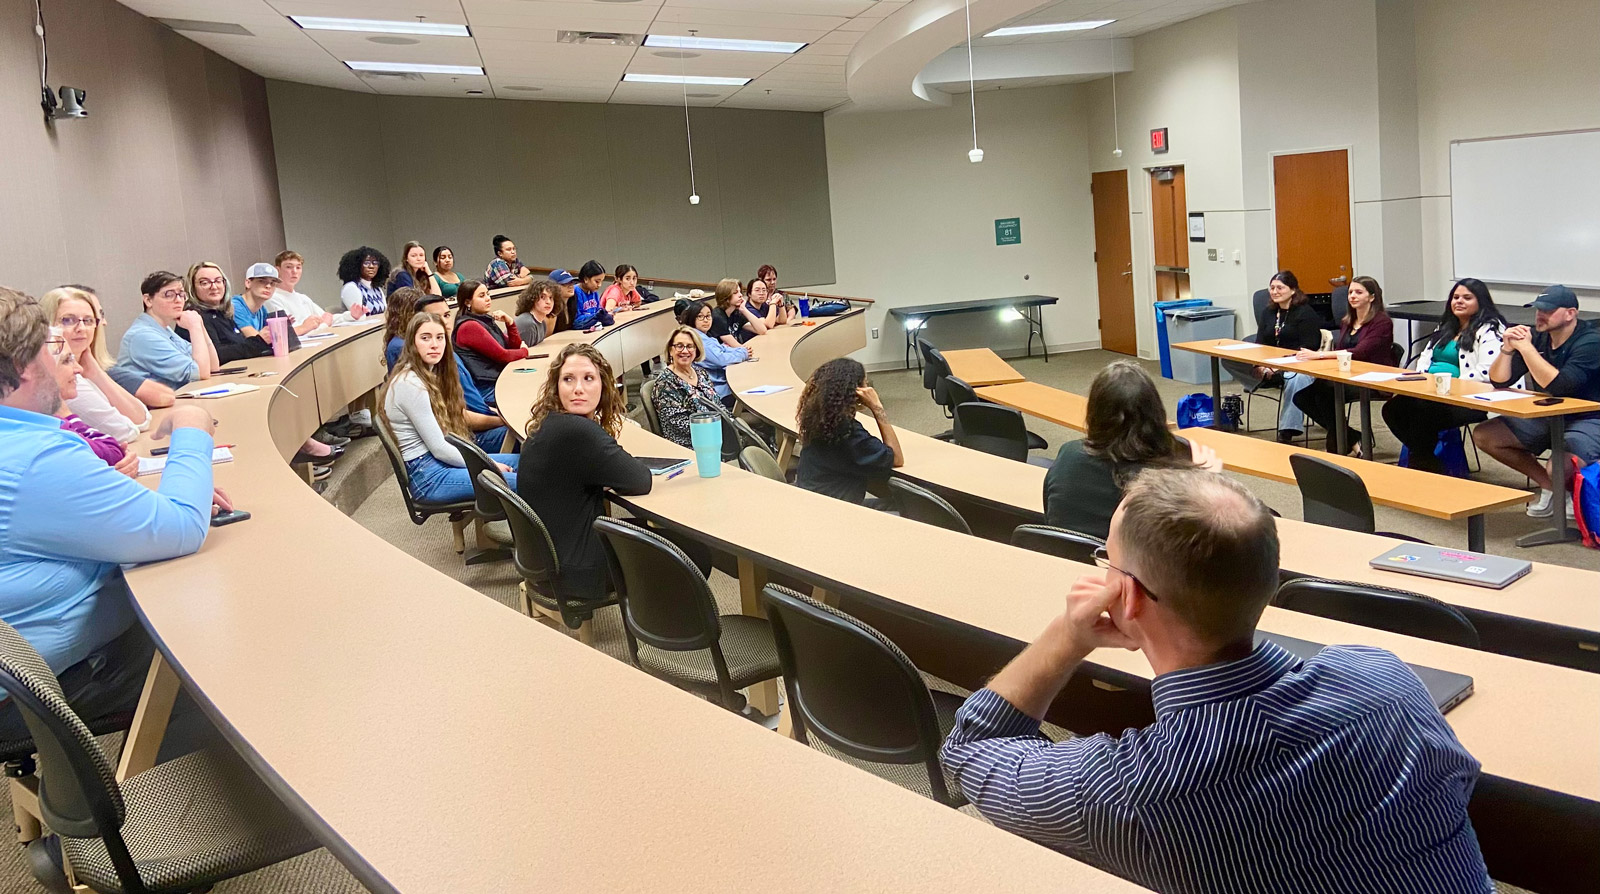 A picture of students in a classroom for the Science Transfer Community Event at the KU Edwards Campus.